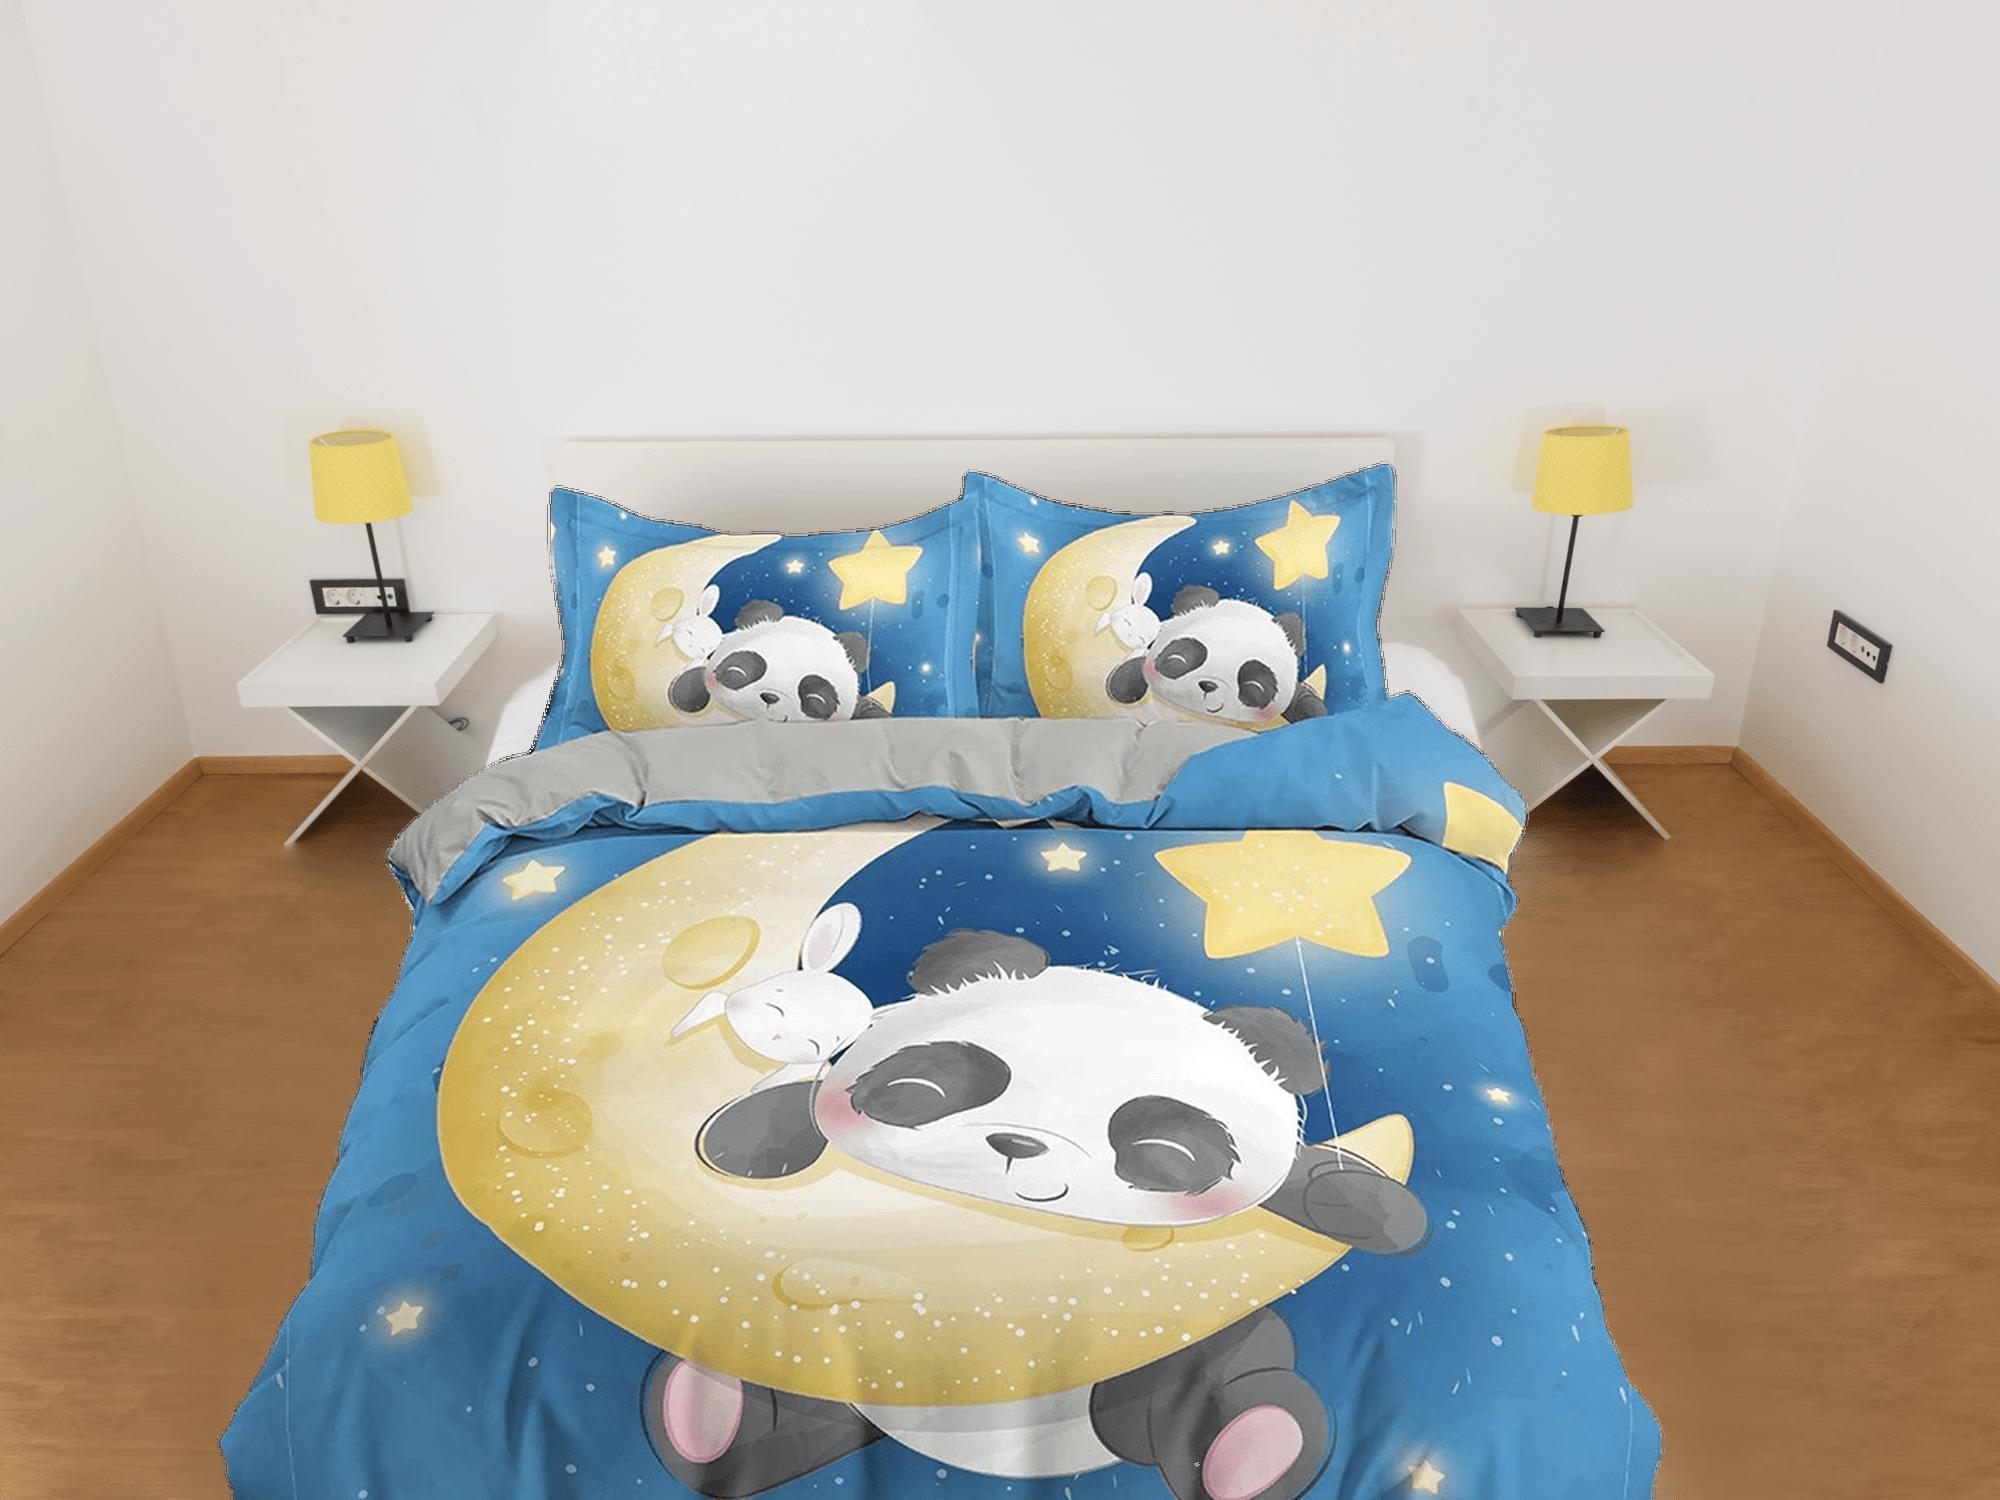 daintyduvet Cute panda and bunny in crescent moon, blue toddler bedding, duvet cover for kids, crib bedding, baby zipper bedding, king queen full twin